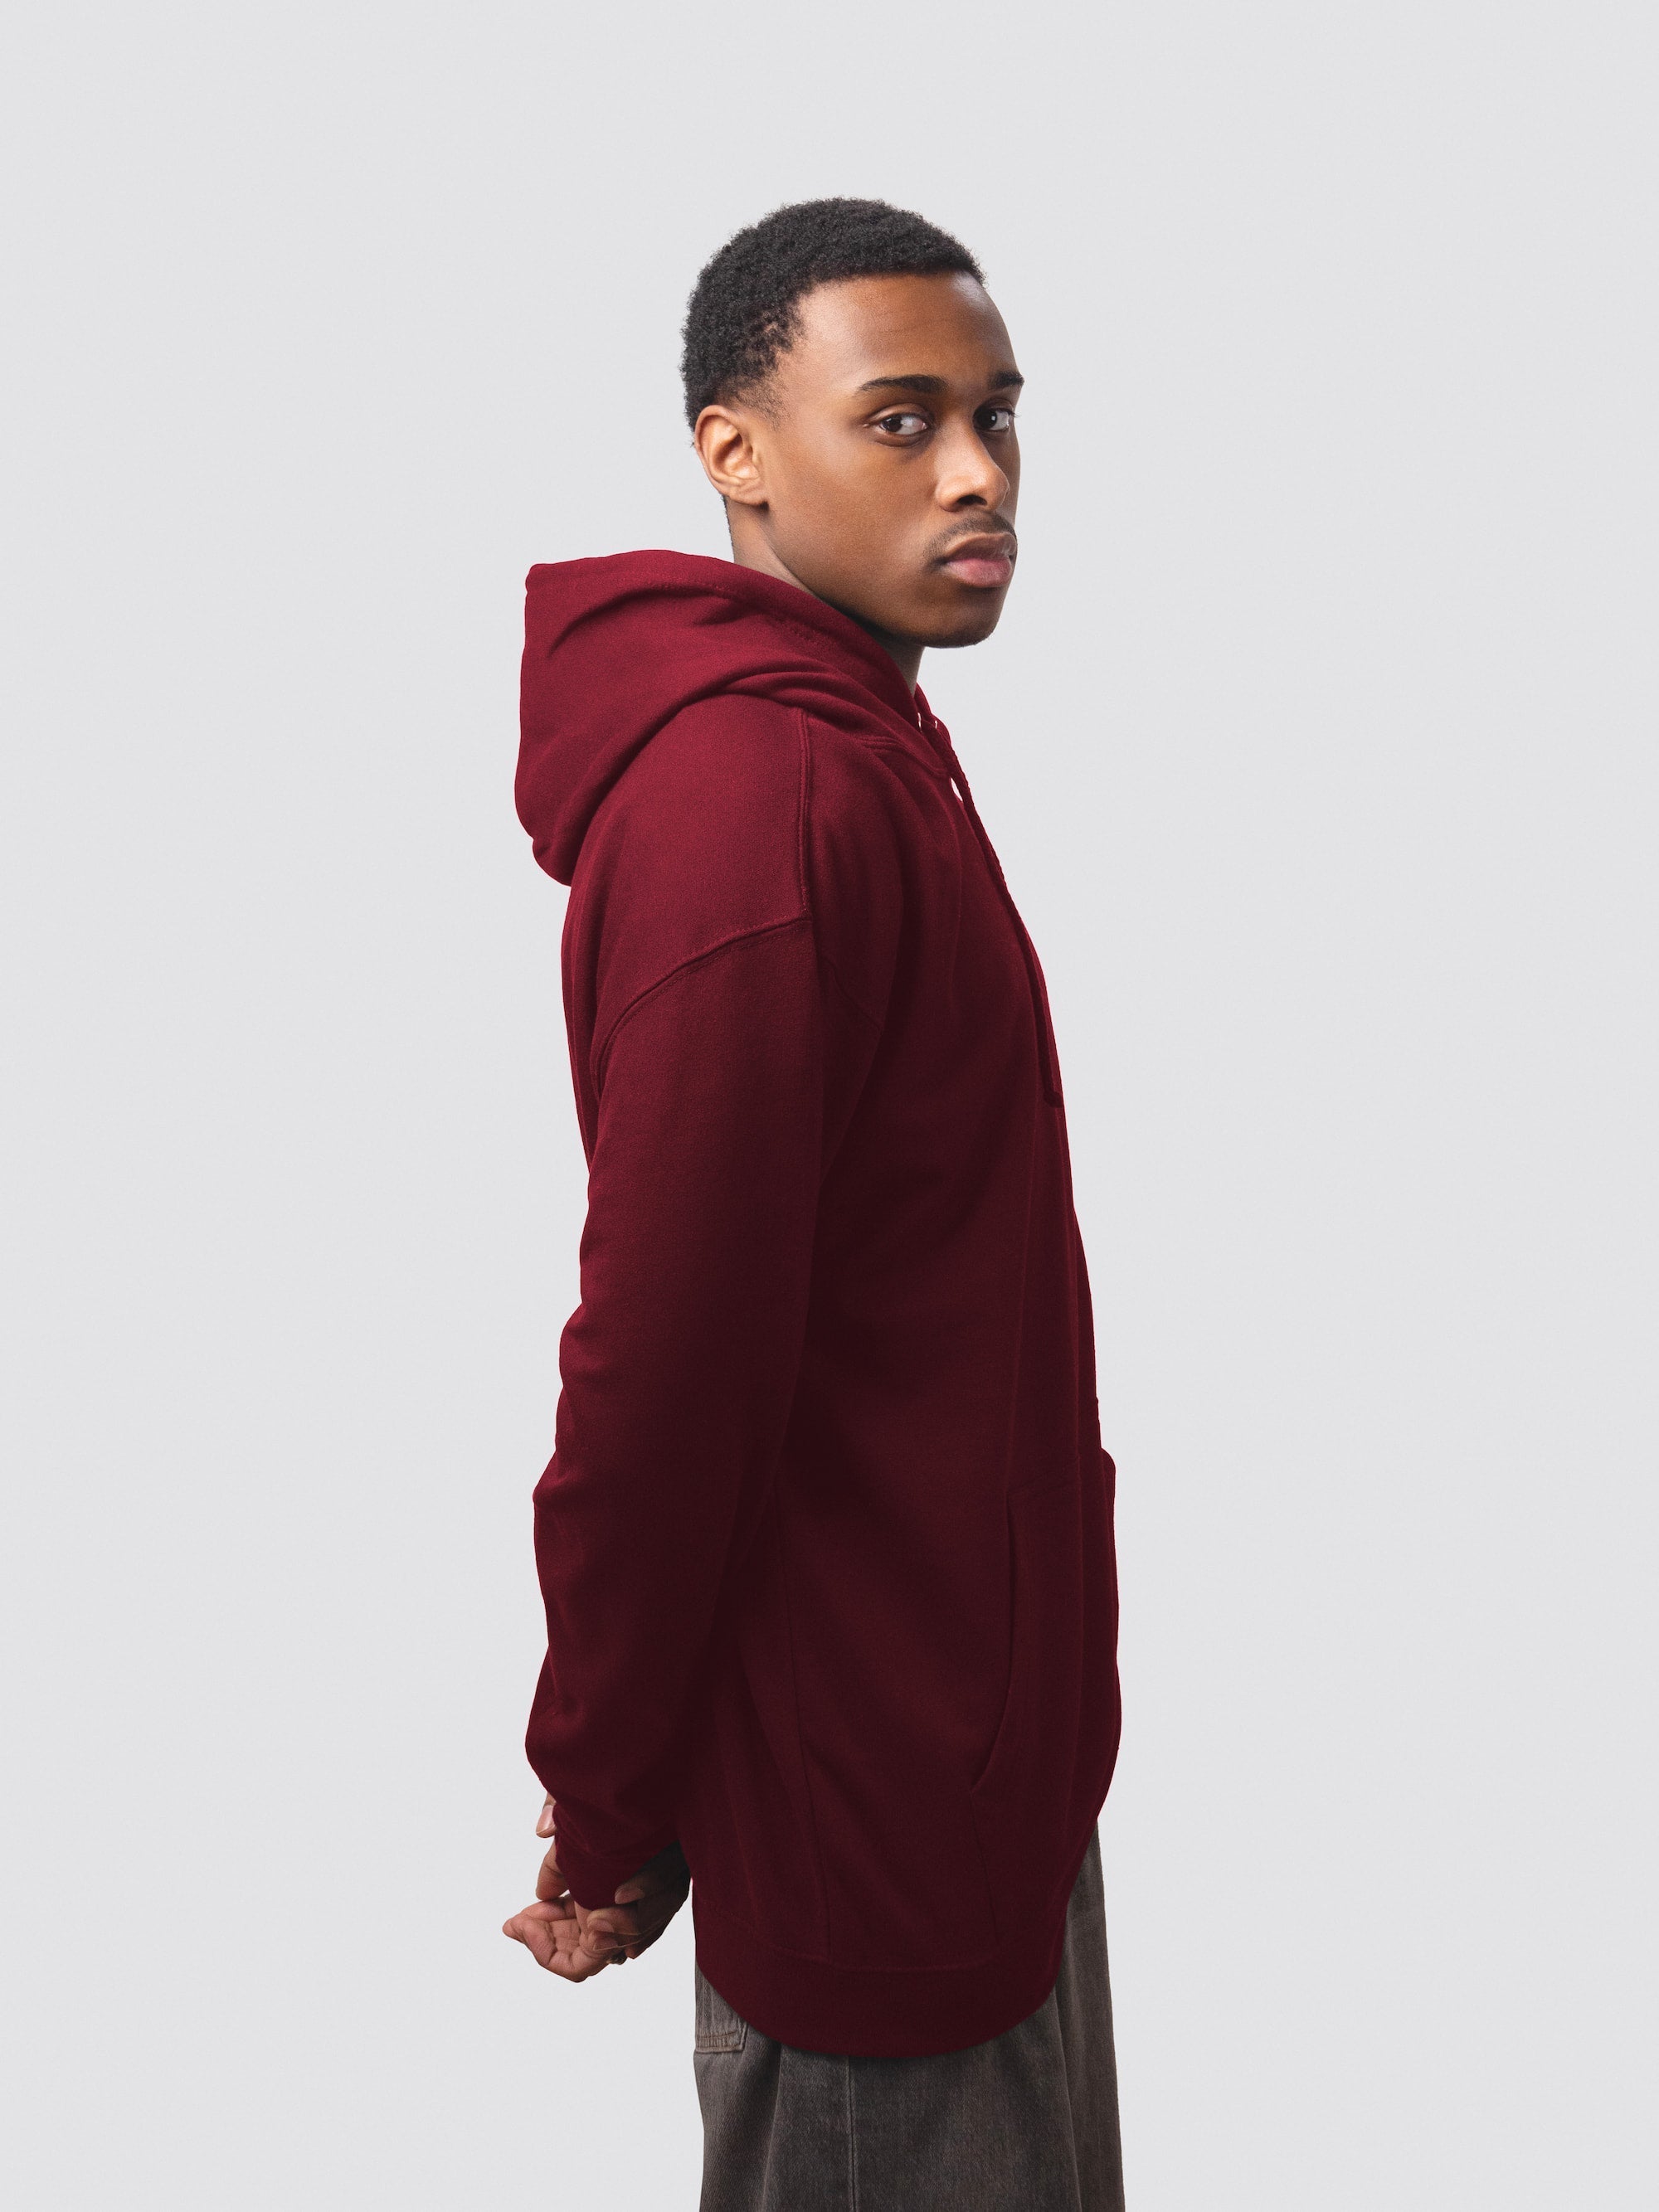 St Chad's College hoodie, made from burgundy cotton-faced fabric